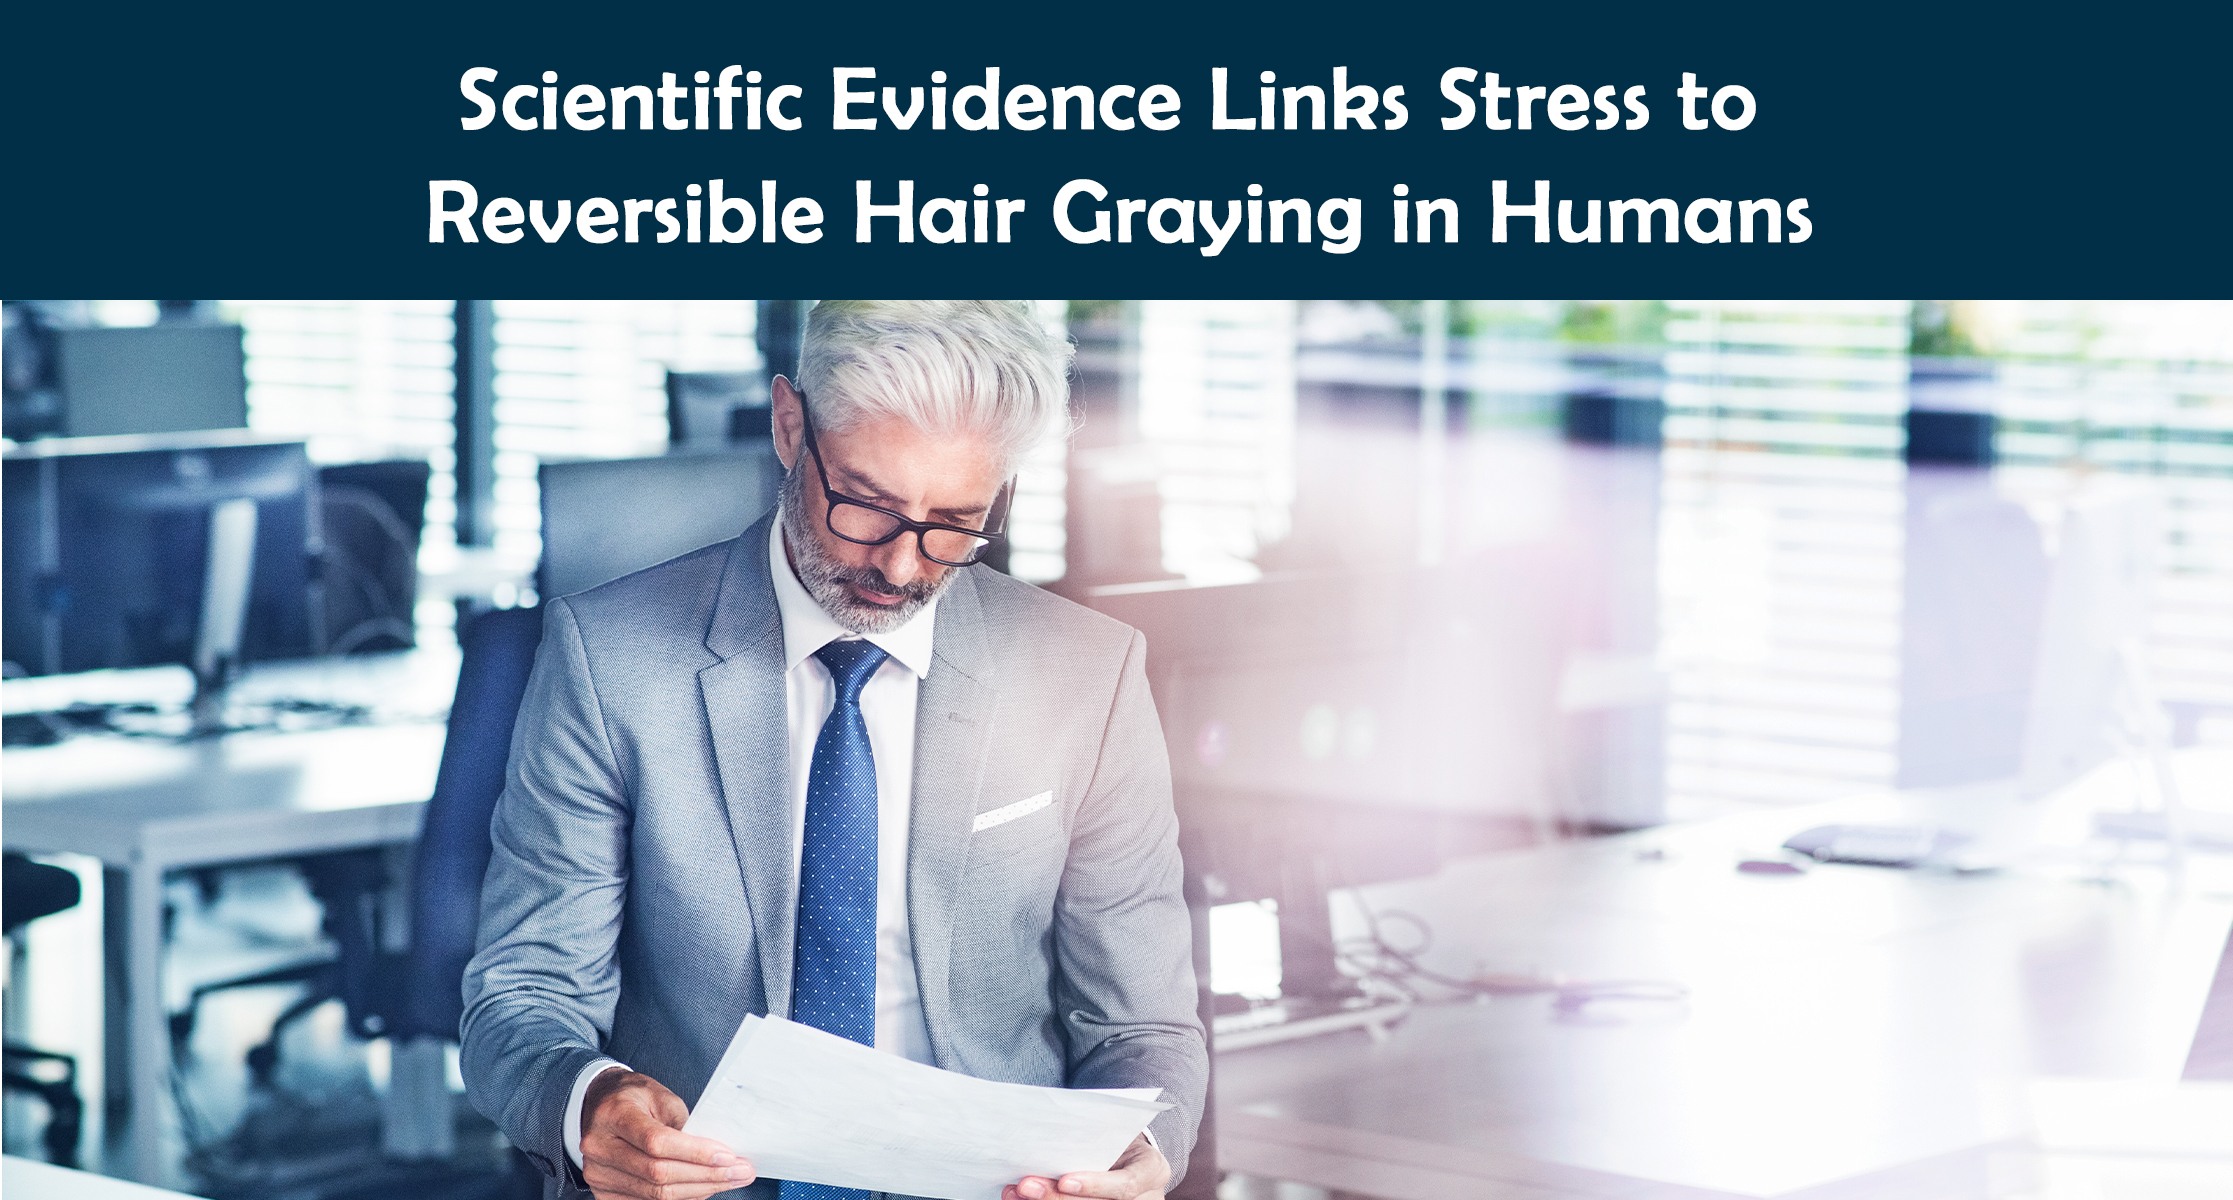 Scientific Evidence Links Stress to Reversible Hair Graying in Humans